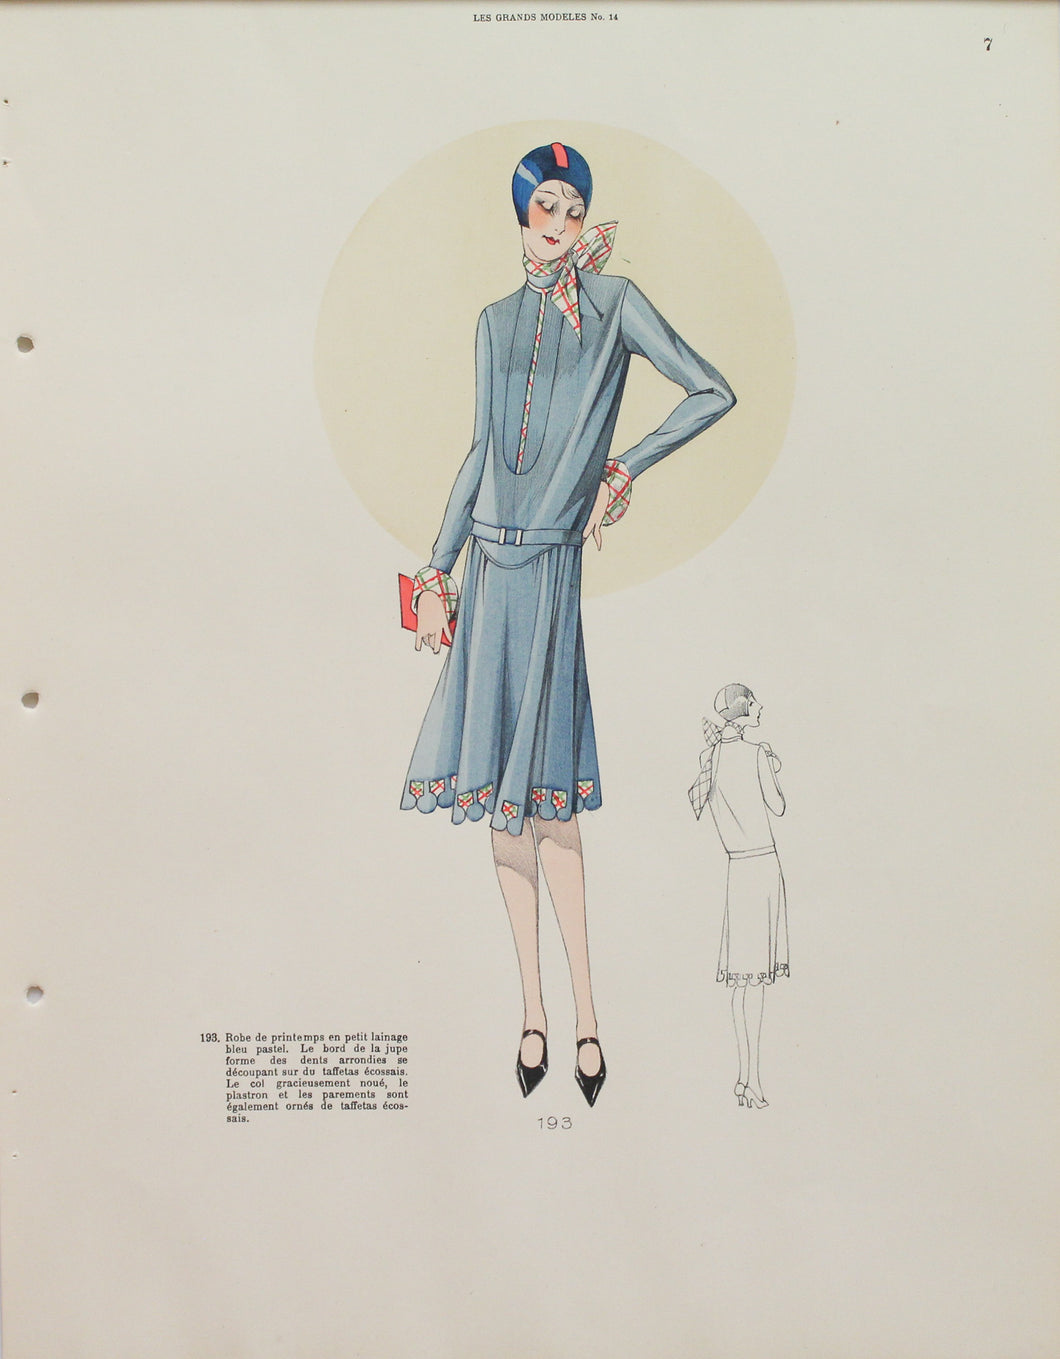 Fashion, Les Grands Models, #14, Page 7, Outfit 193, 1920 - 1929